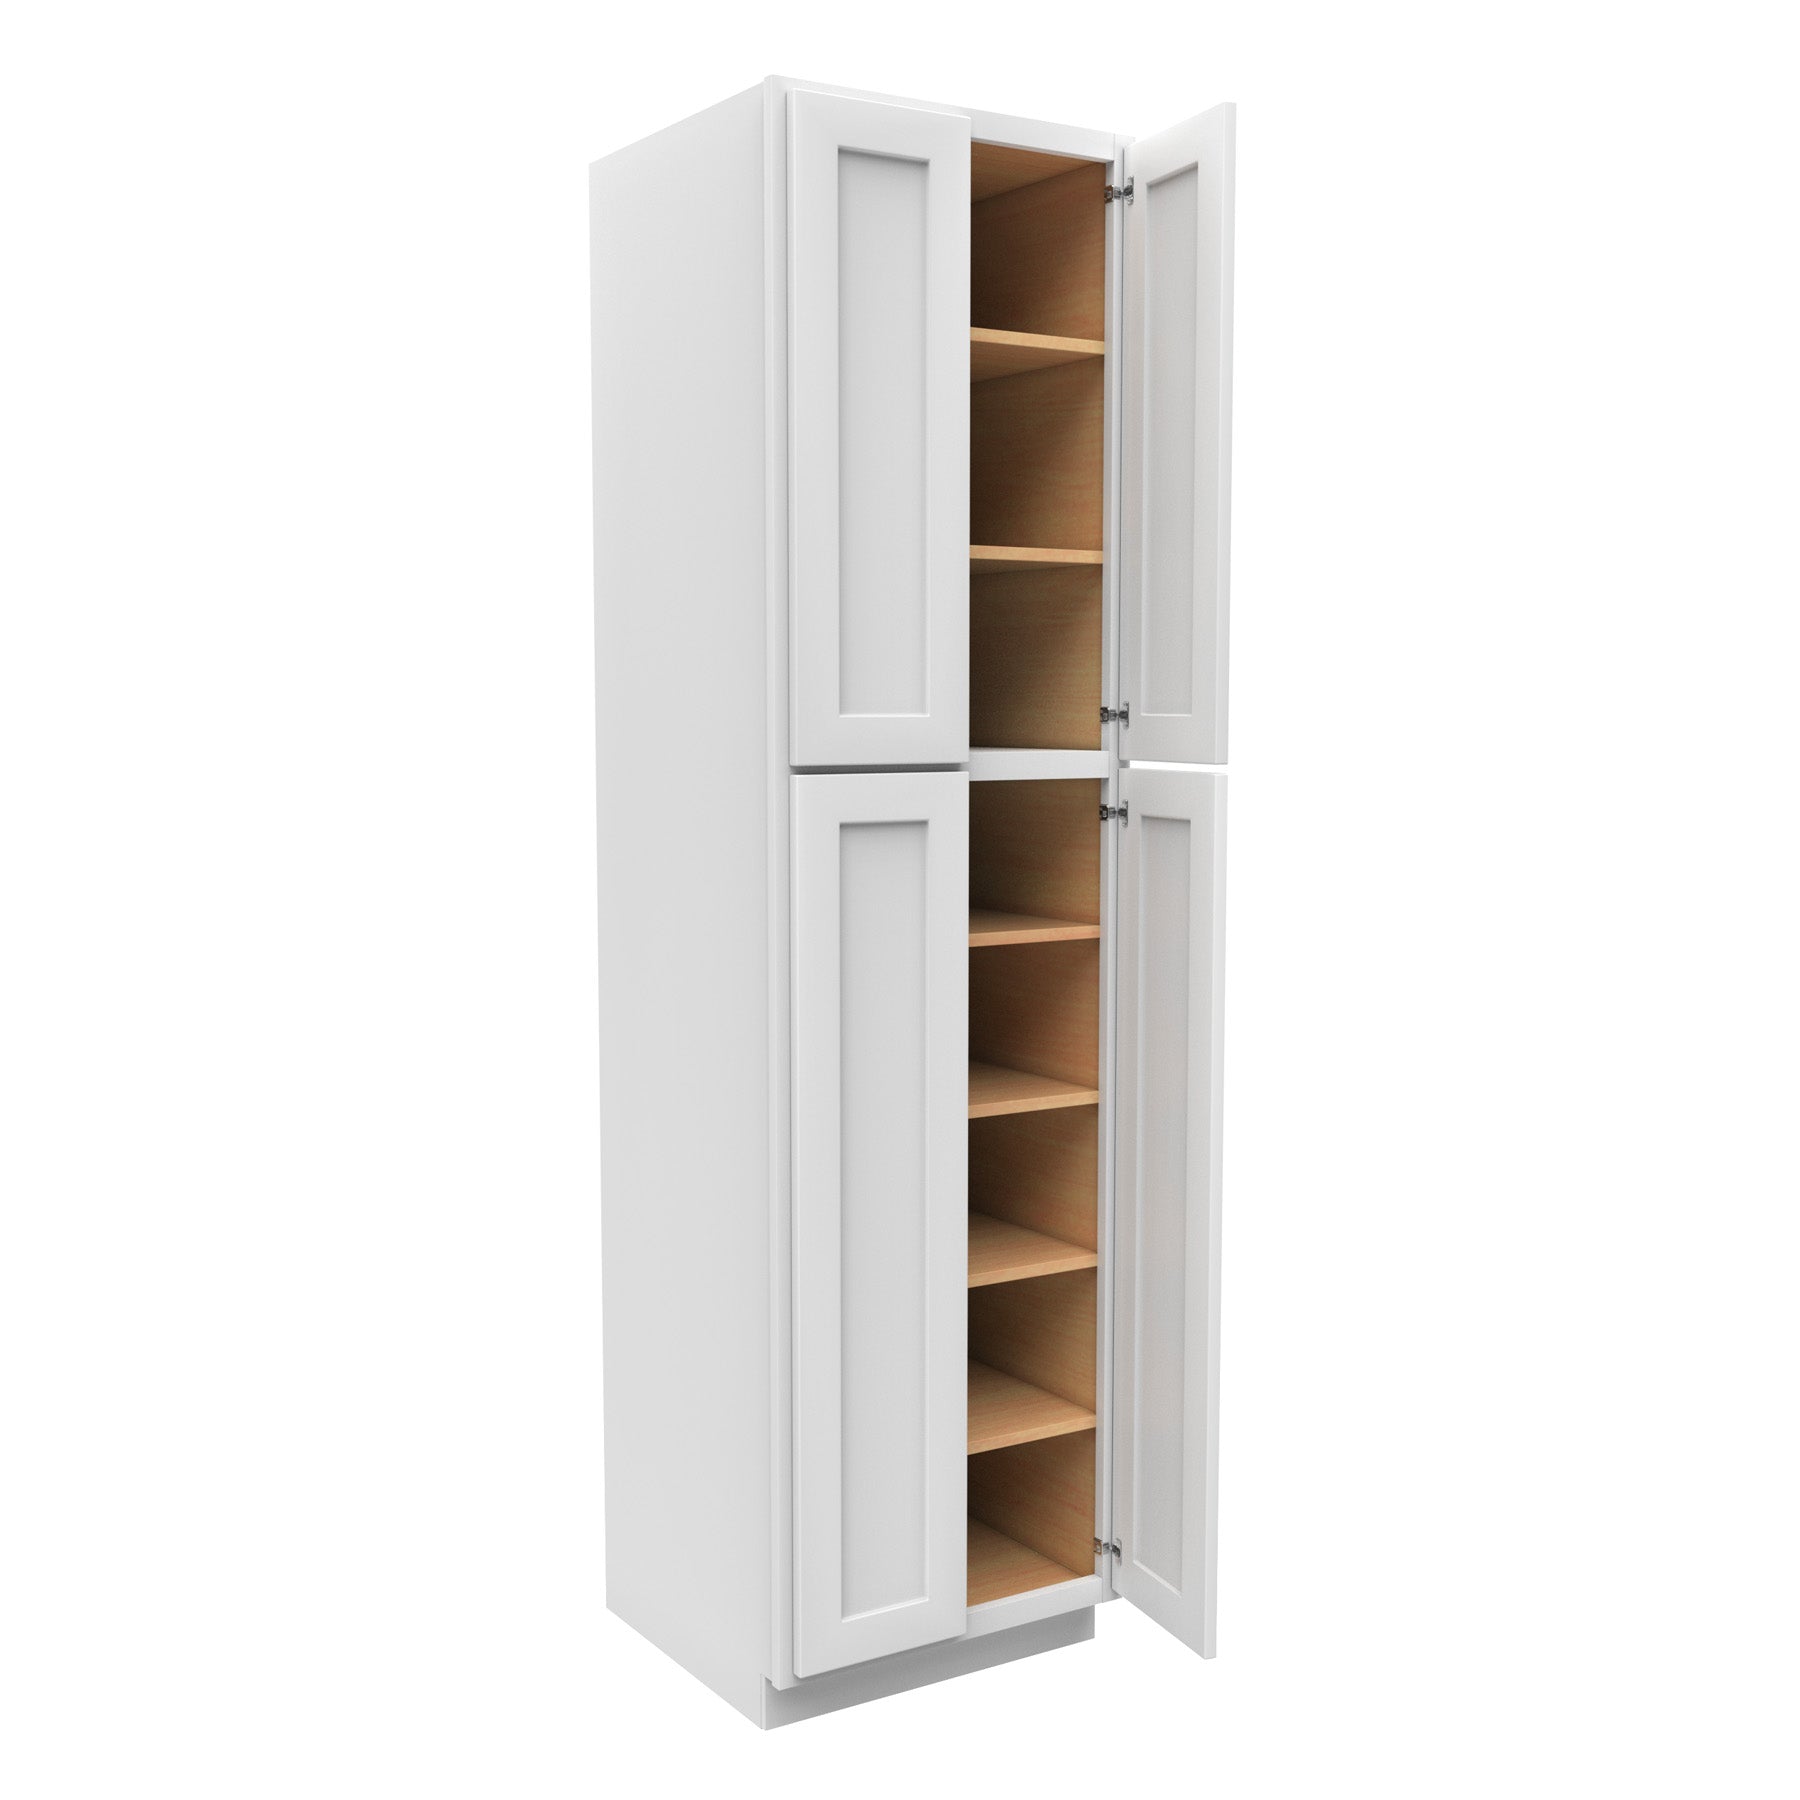 90 Inch High Pantry Cabinet With Double Door - Luxor White Shaker - Ready To Assemble, 24"W x 90"H x 24"D